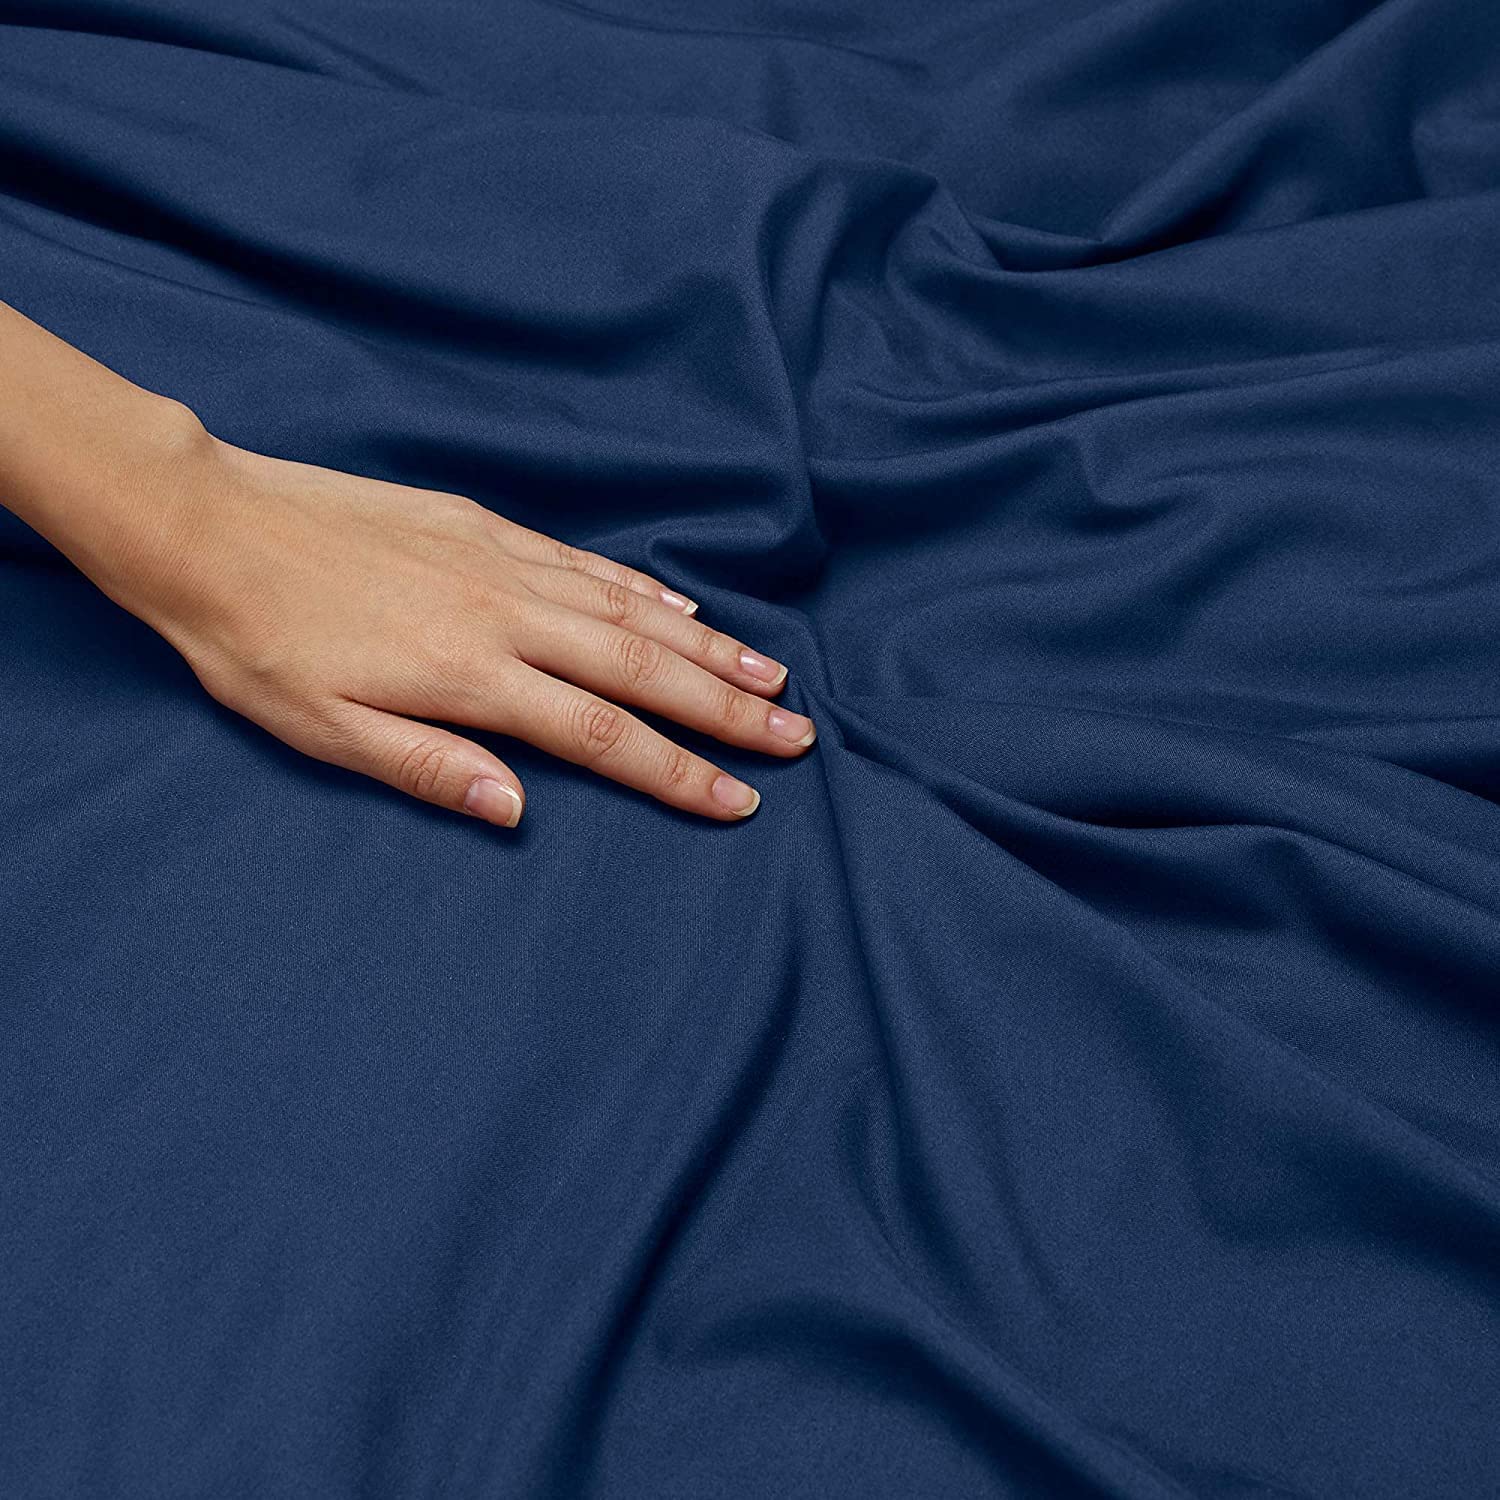 100% Pure Egyptian Cotton Queen Navy Duvet Cover Set 400 Thread Count- 3 Piece- Sateen Weave- Long Staple Combed Cotton-Extra Soft Smooth Silky- Sateen Weave (Queen,Navy)